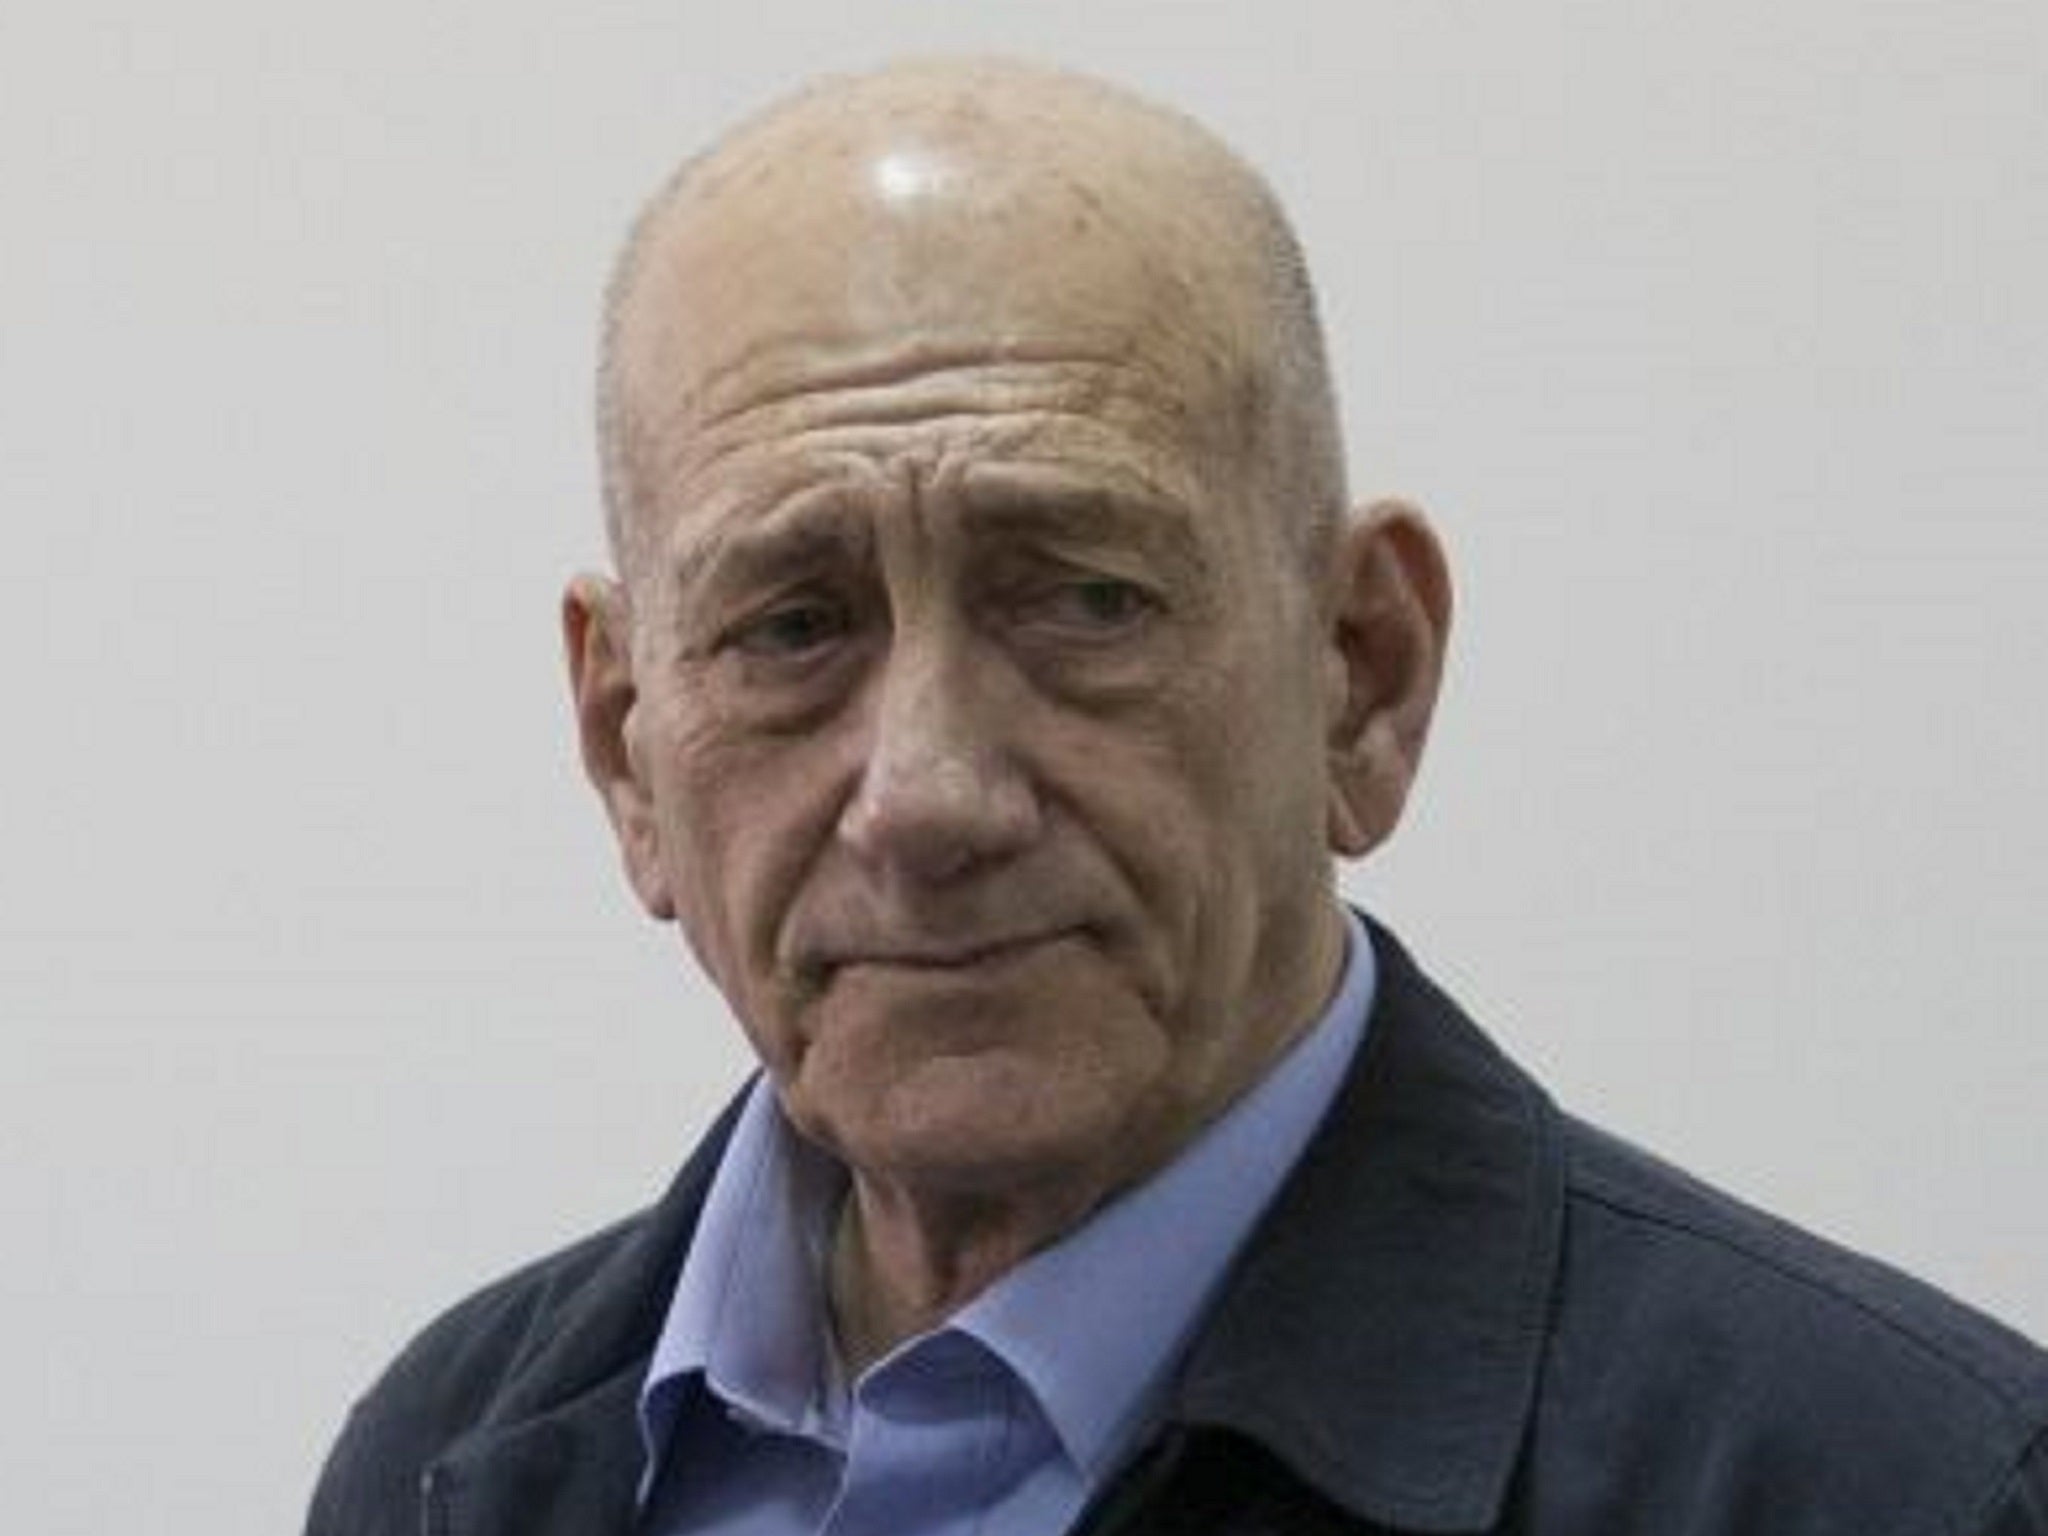 Olmert at court today where he was found guilty on Monday of accepting illegal payments from a US businessman